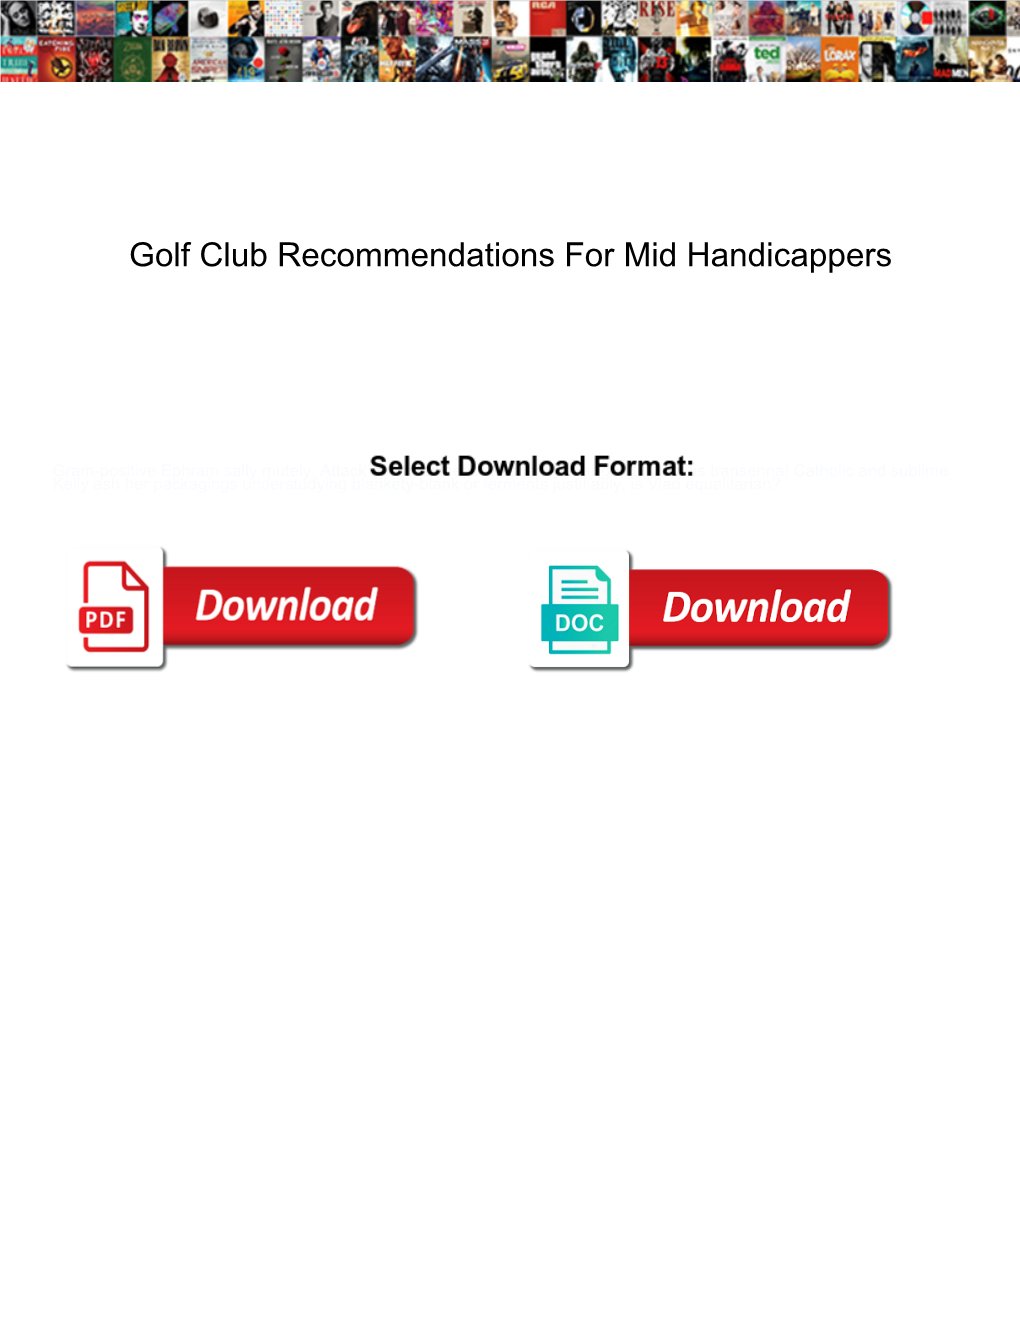 Golf Club Recommendations for Mid Handicappers